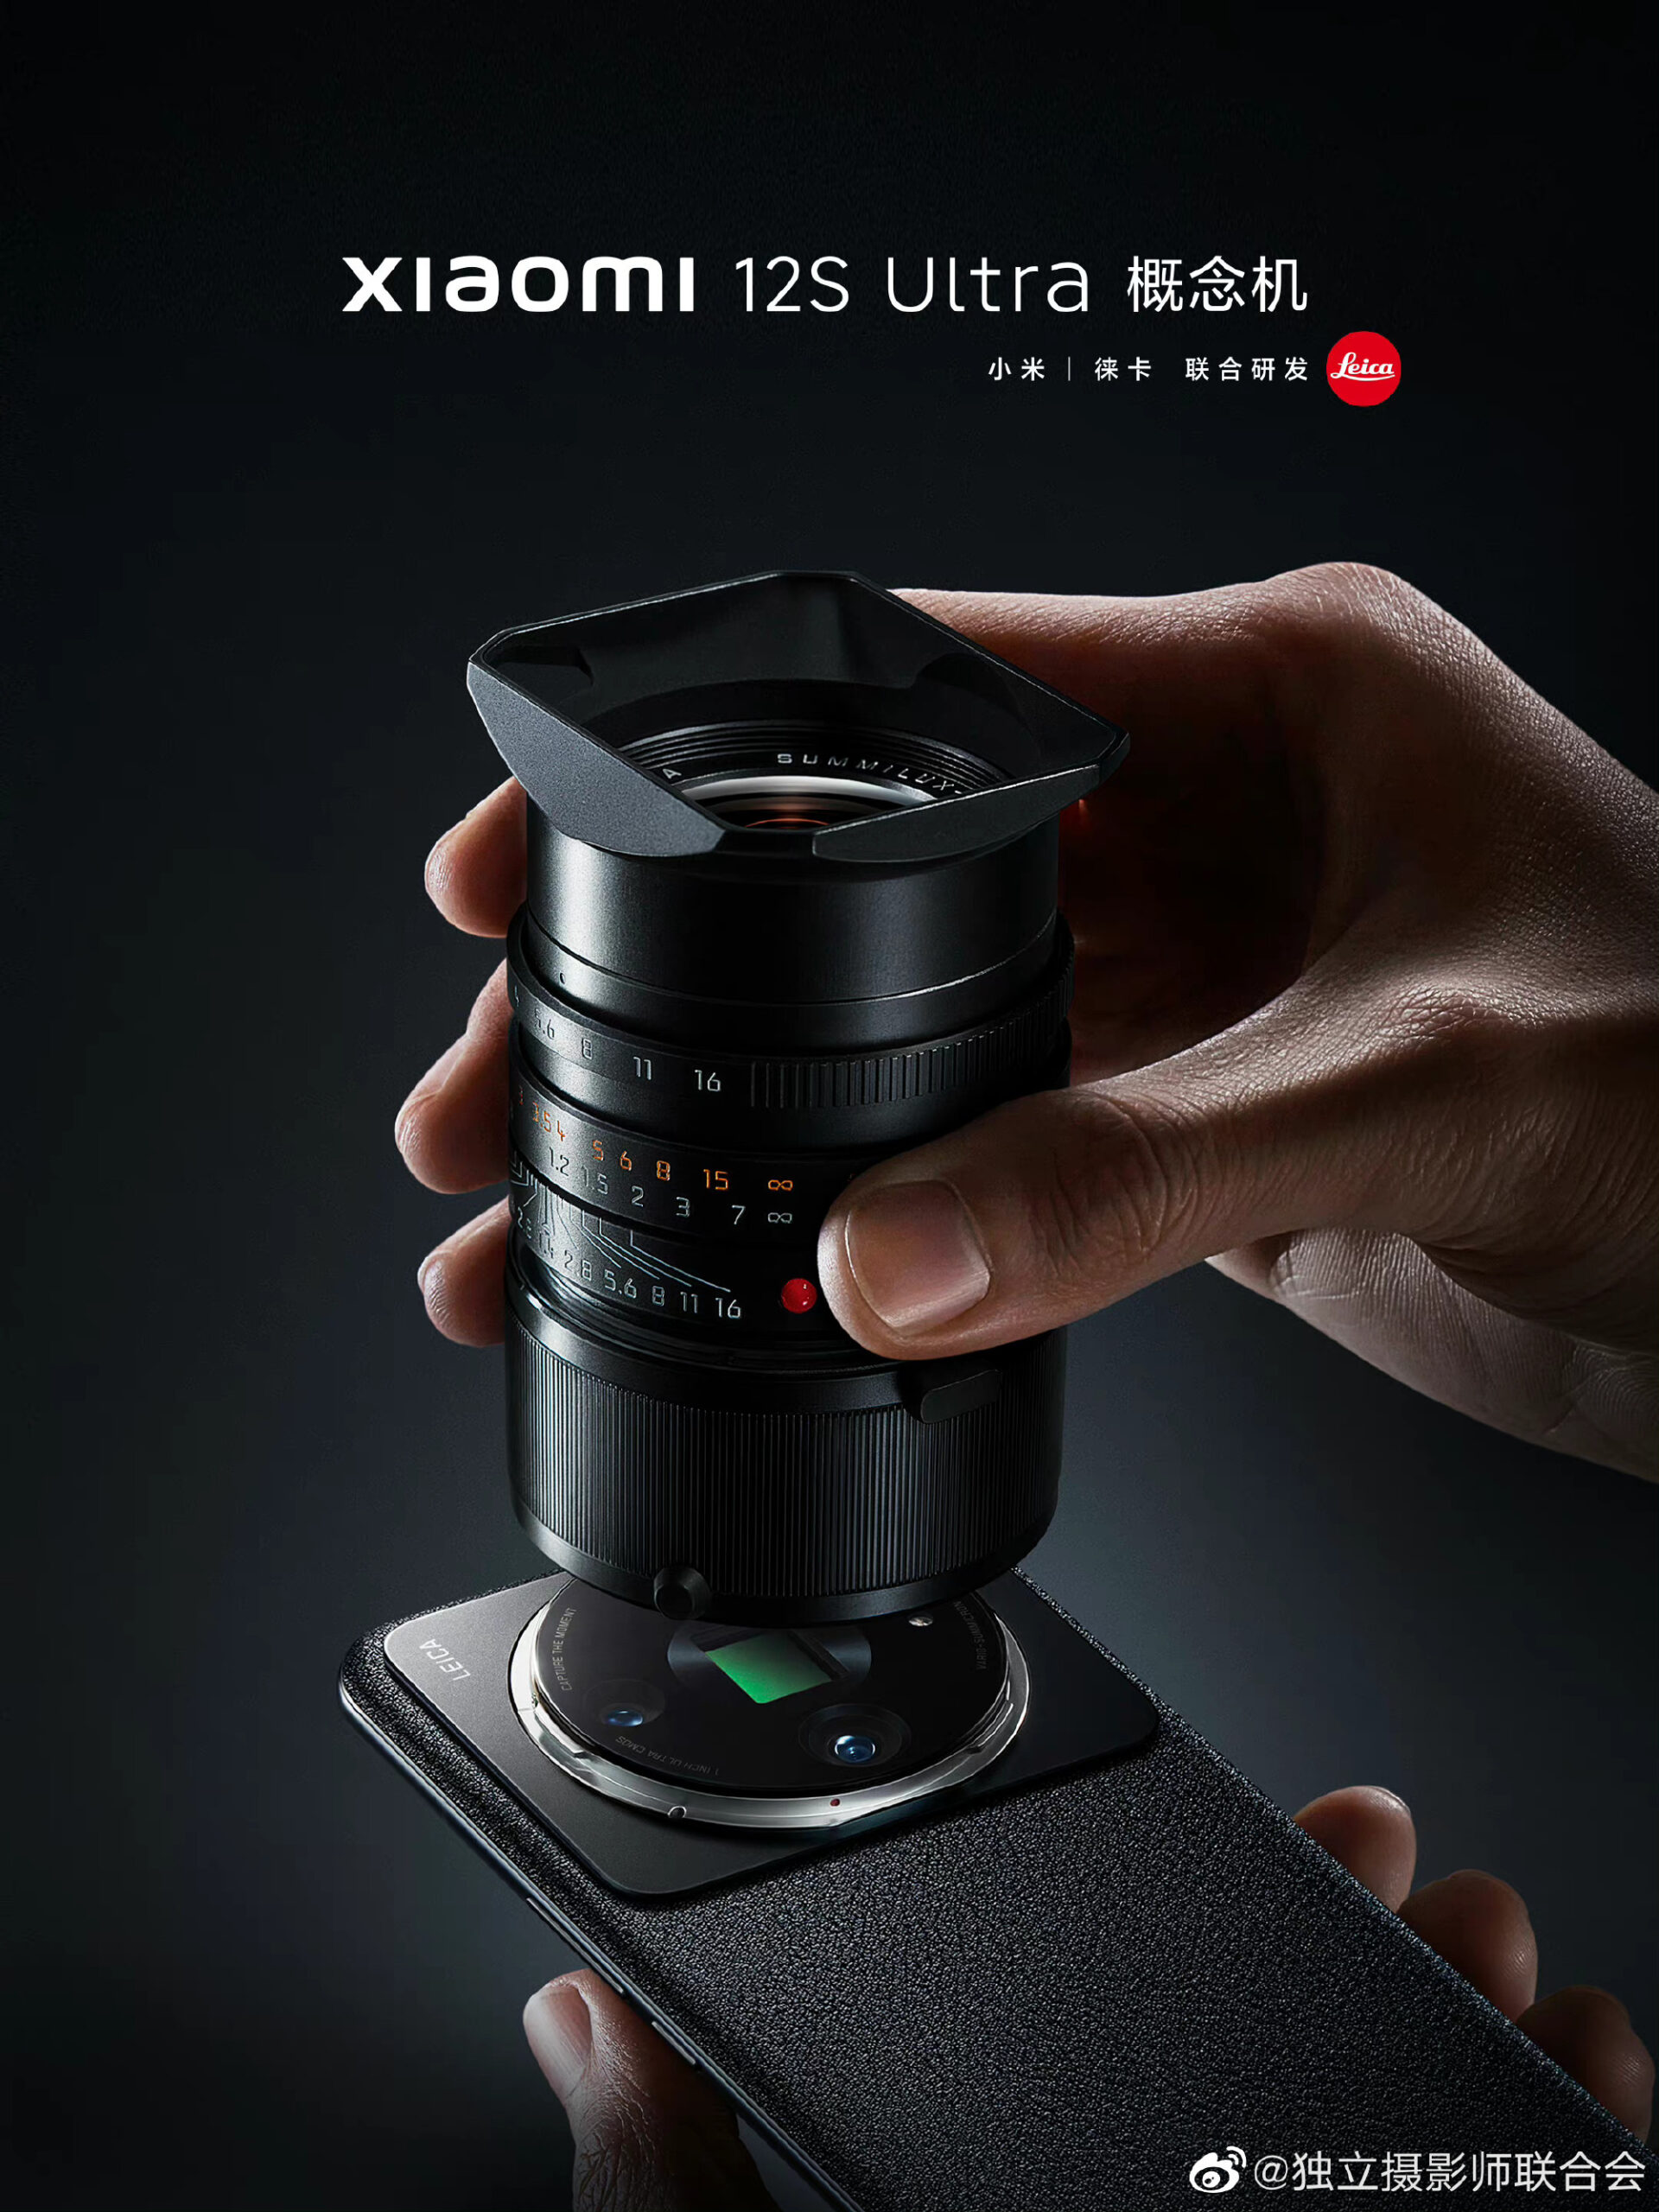 Xiaomi shows new concept phone based on the 12S Ultra with a mount